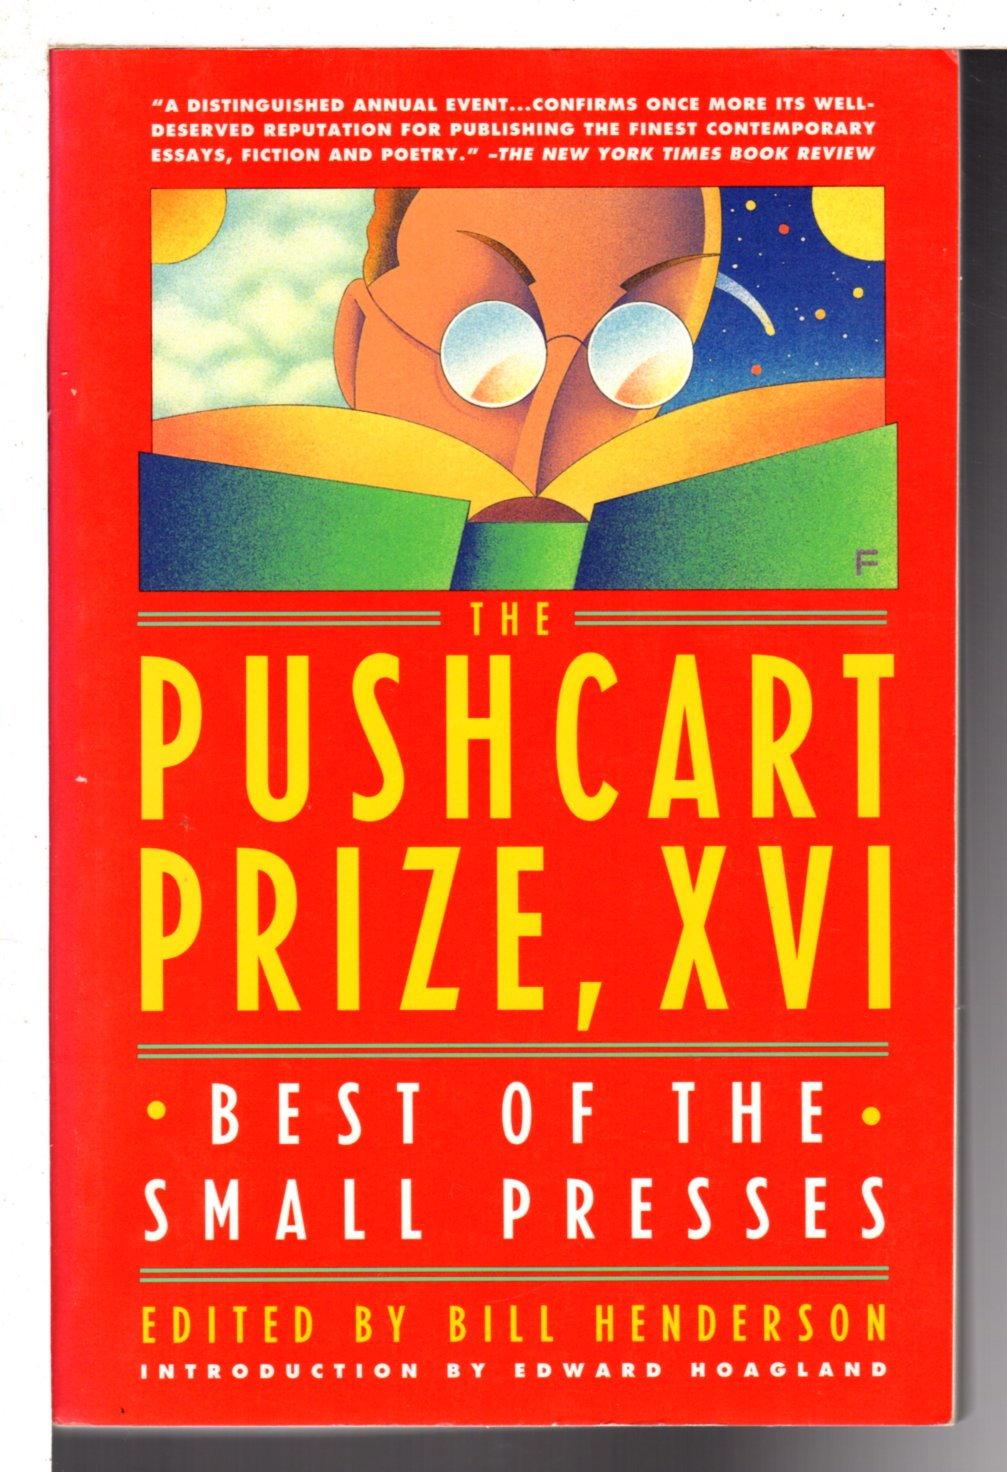 THE PUSHCART PRIZE XVI: Best of the Small Presses. - Anthology, signed] Bill Henderson, Bill, editor. Joyce Carol Oates, signed.